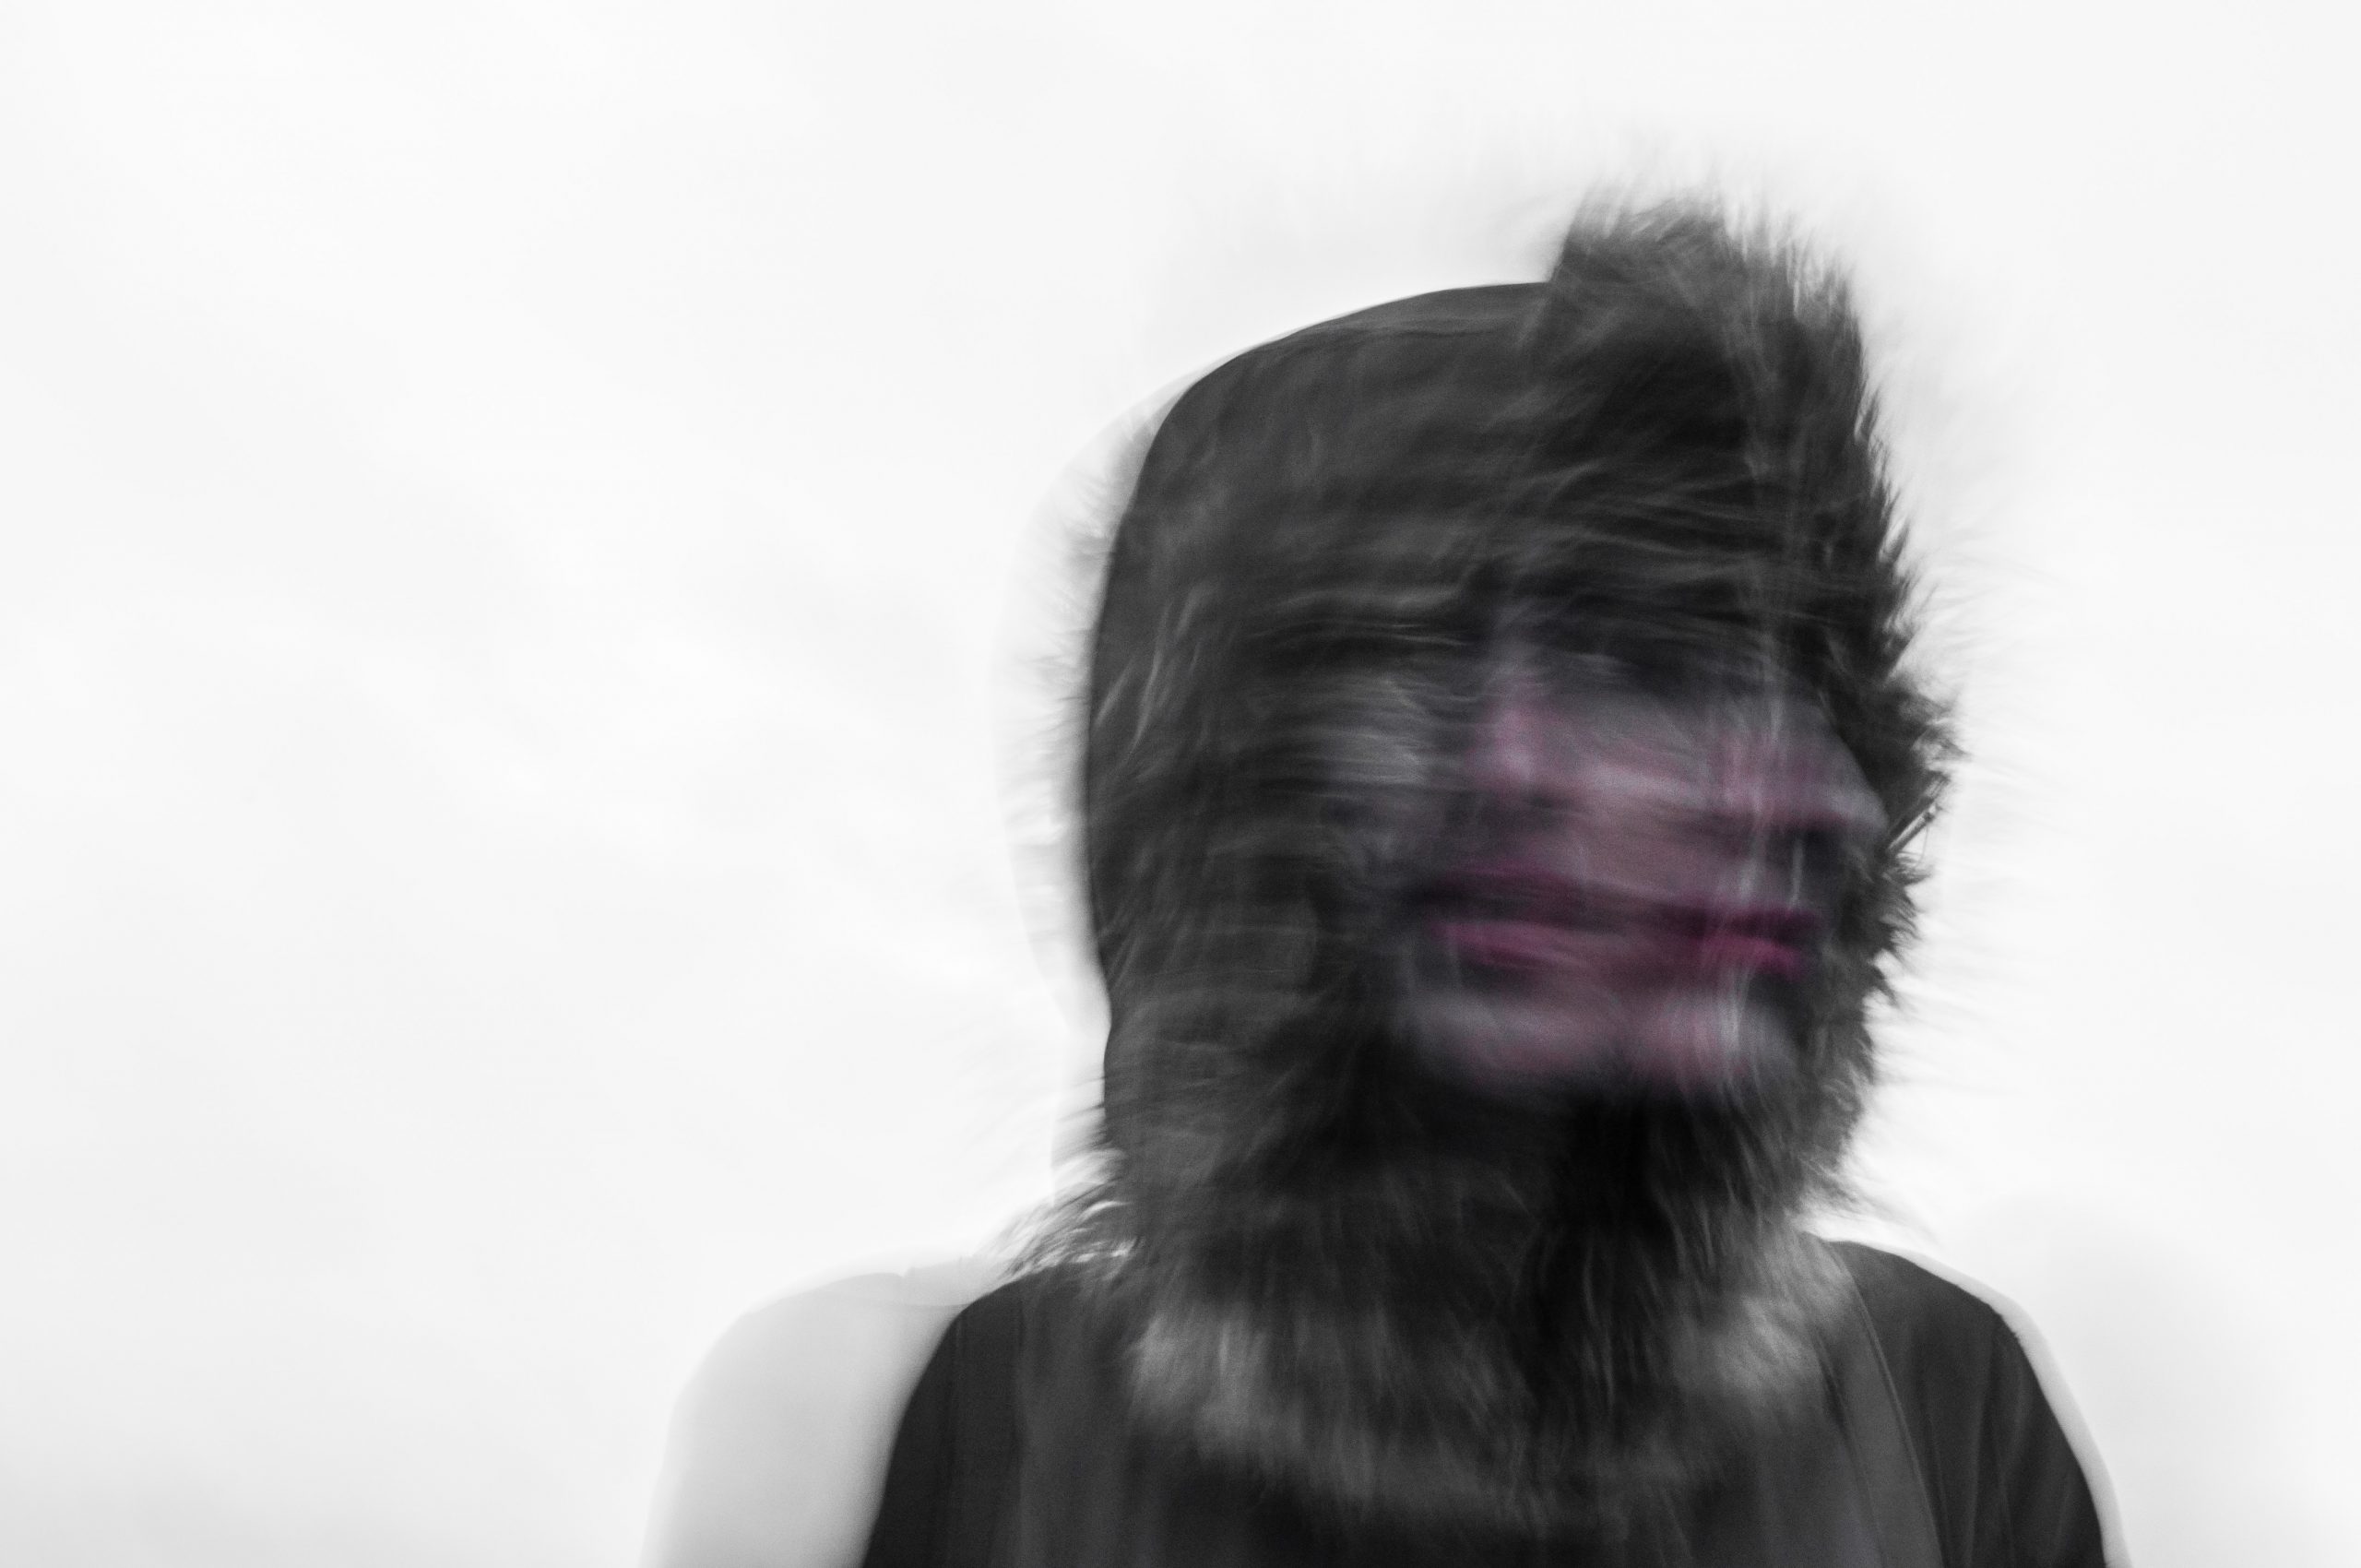 A blurry, black and white image of a person wearing a hooded jacket with fur trim. The person's face appears distorted and doubled, creating a ghostly effect against a plain, light-colored background—evocative of the isolation felt during trauma treatment at Khiron Clinics.